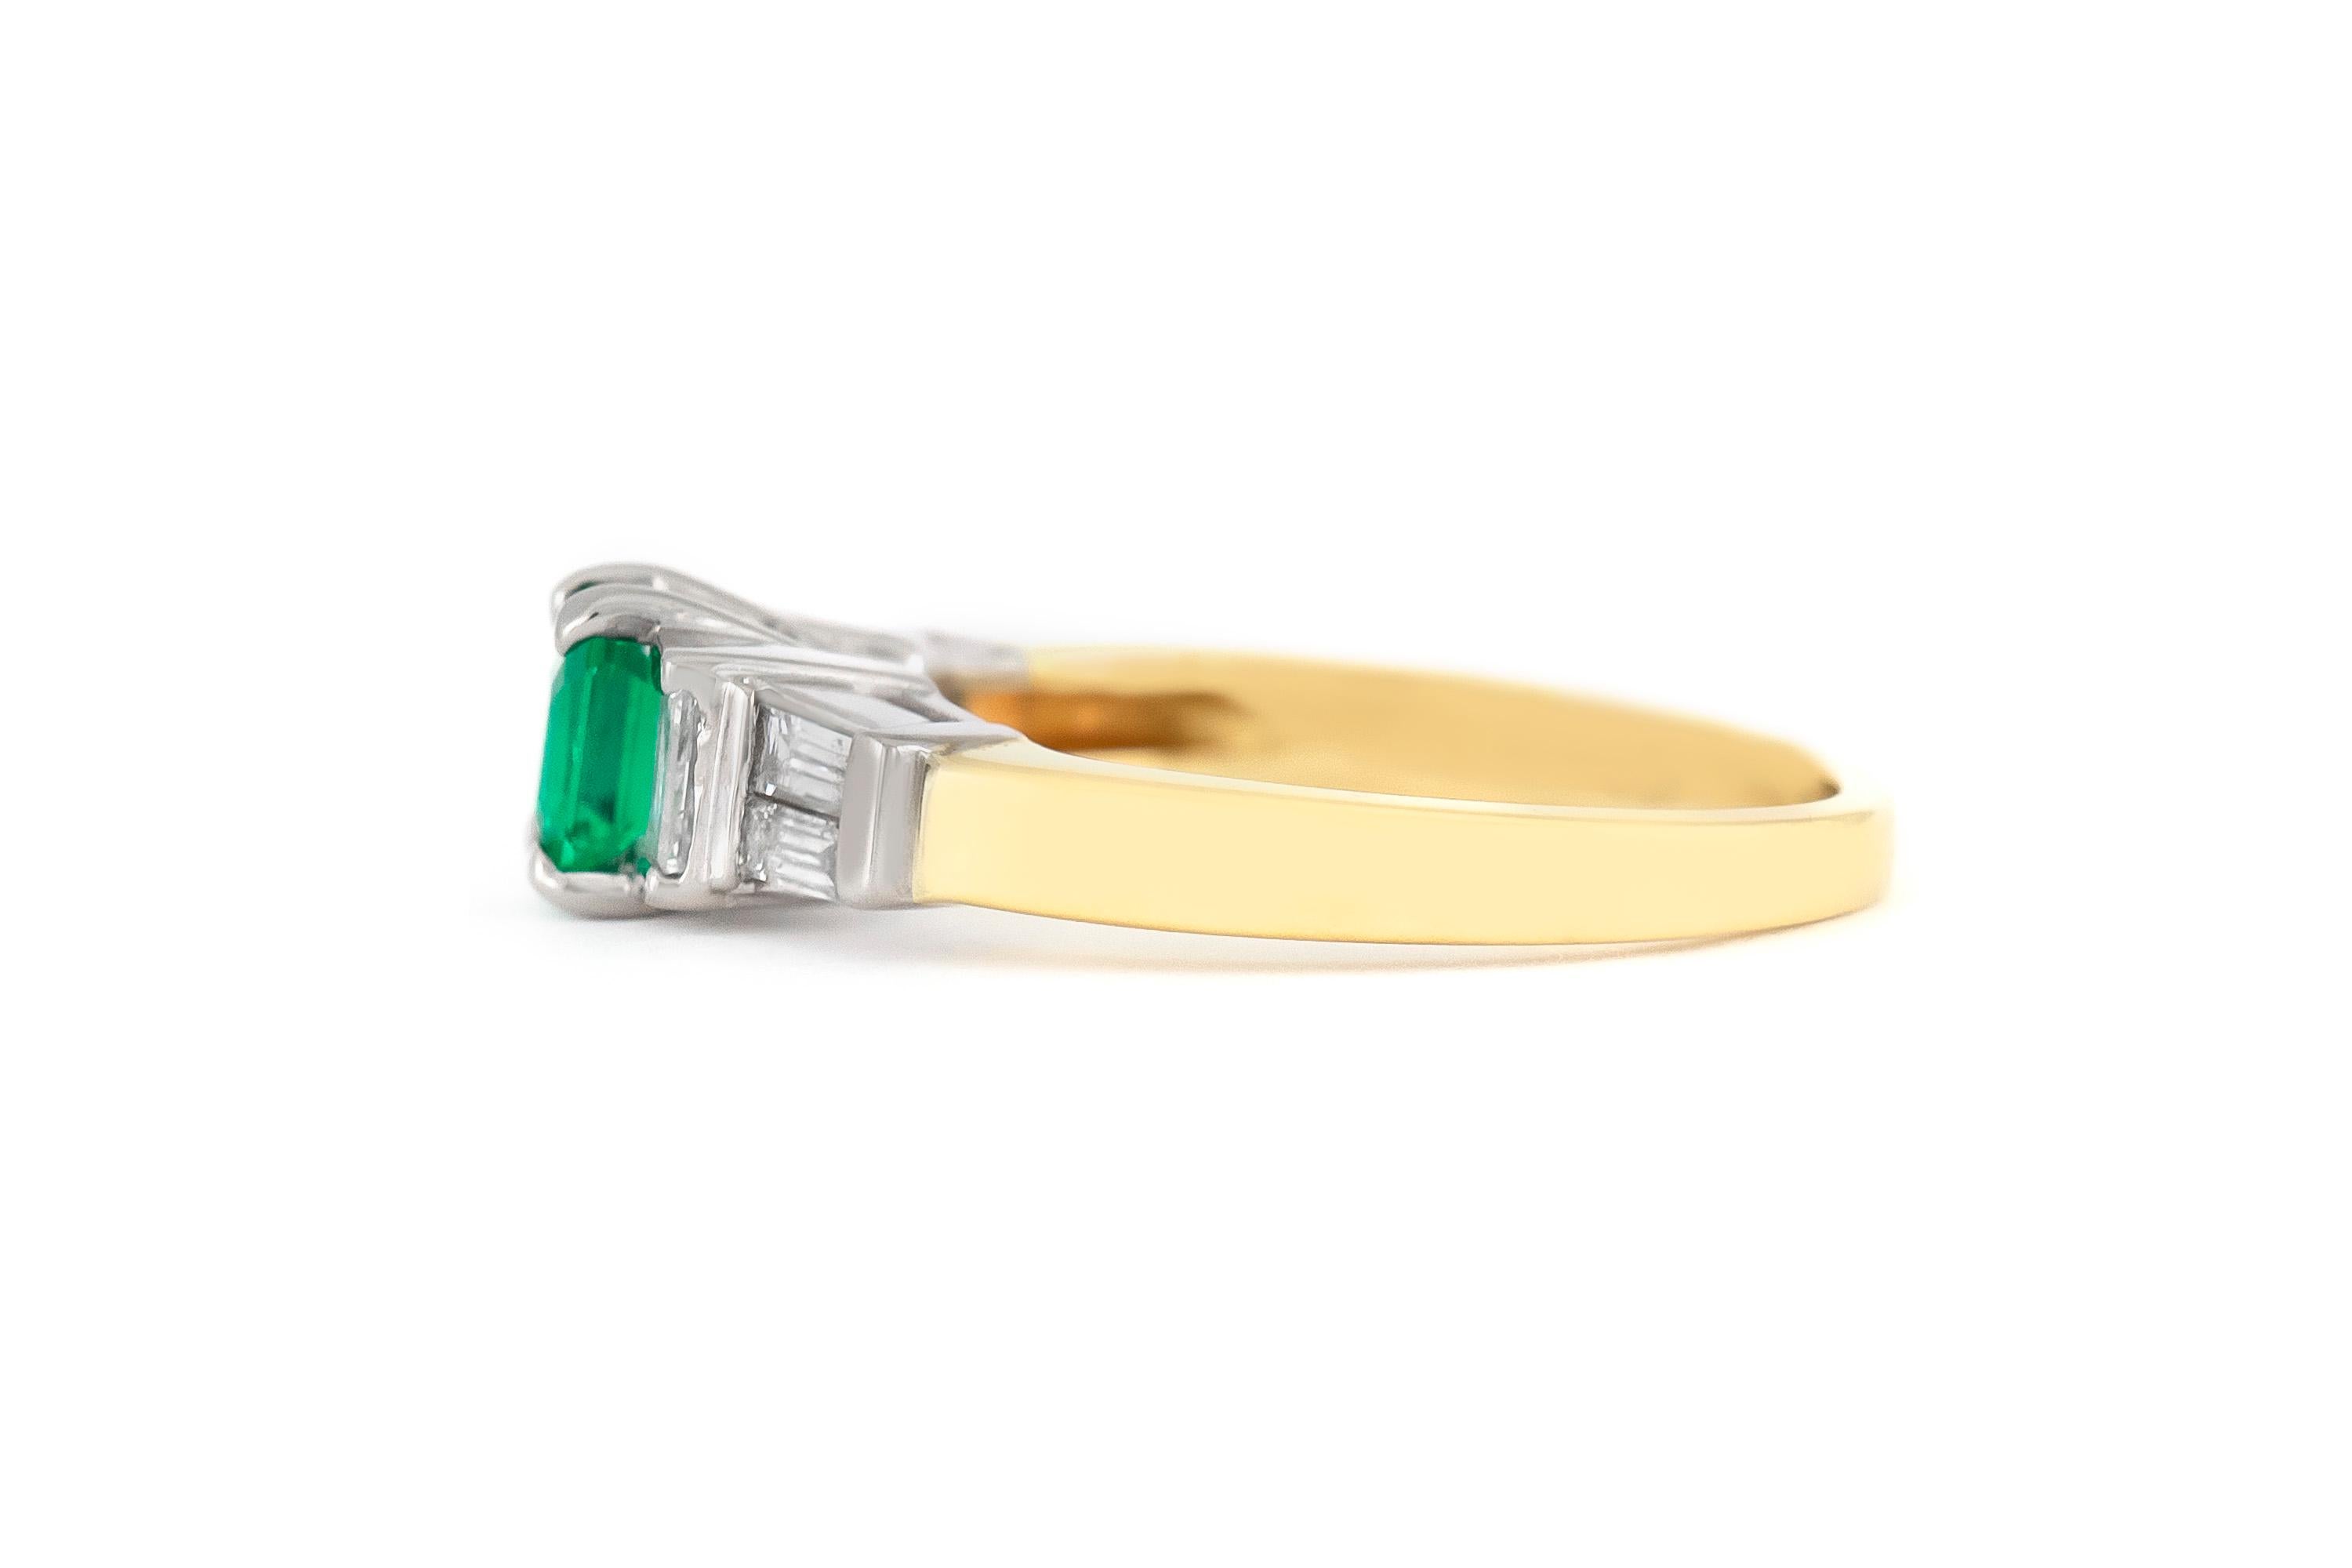 The ring is finely crafted in 14k with center emerald weighing approximately total of 0.60 carat and diamonds weighing approximately total of 0.50 carat.
Circa 1980.